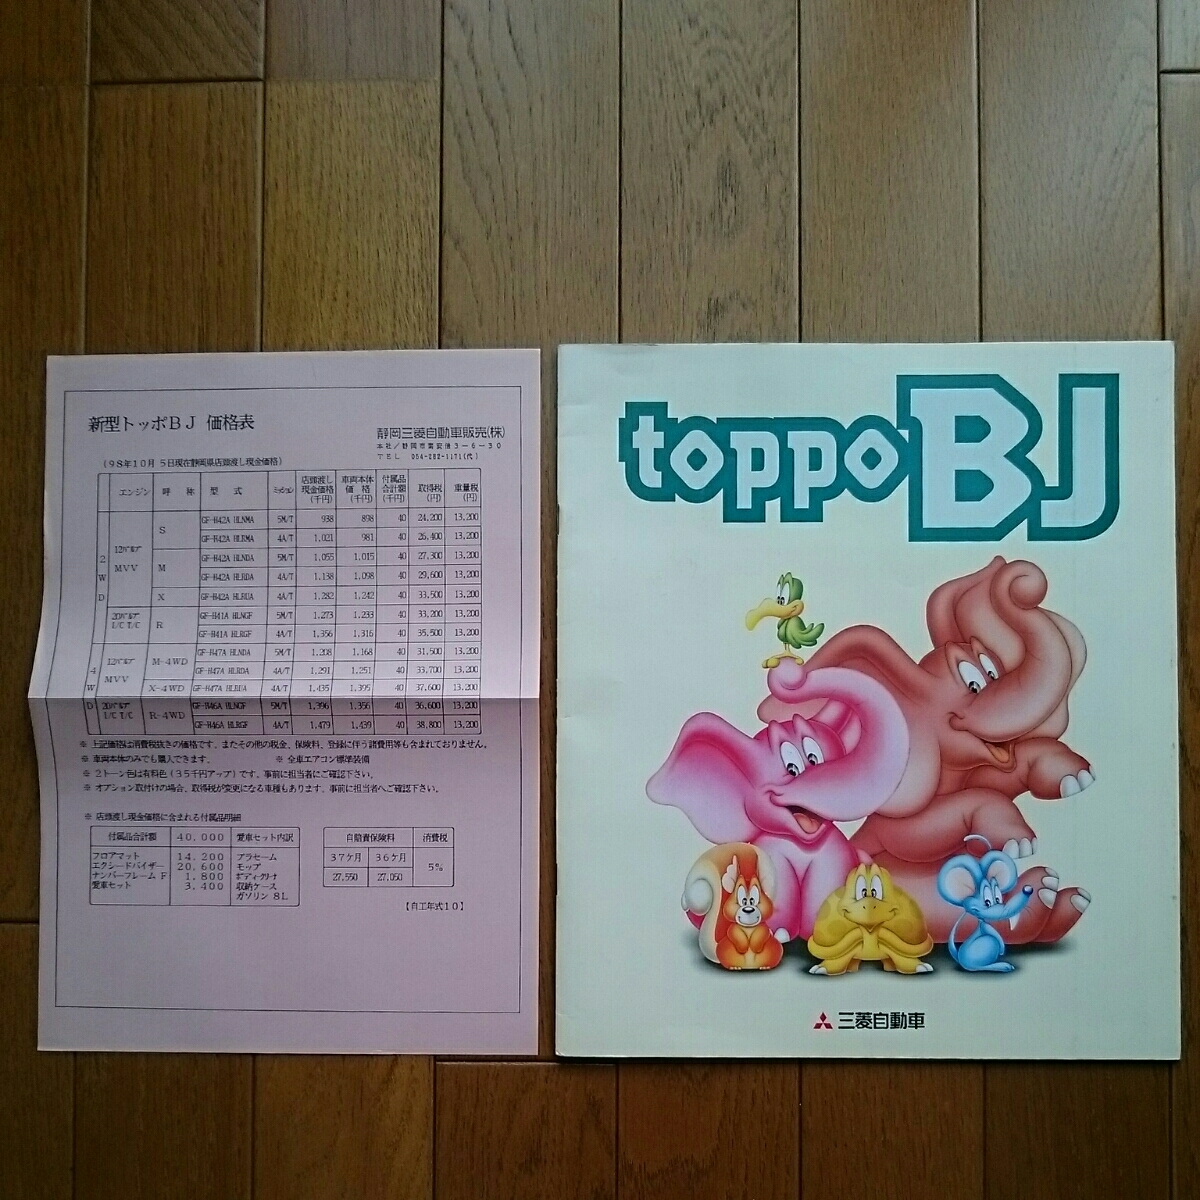 1998 year 10 month * seal equipped *H42A* Mitsubishi * Toppo BJ*24.* catalog & vehicle price table R publication 